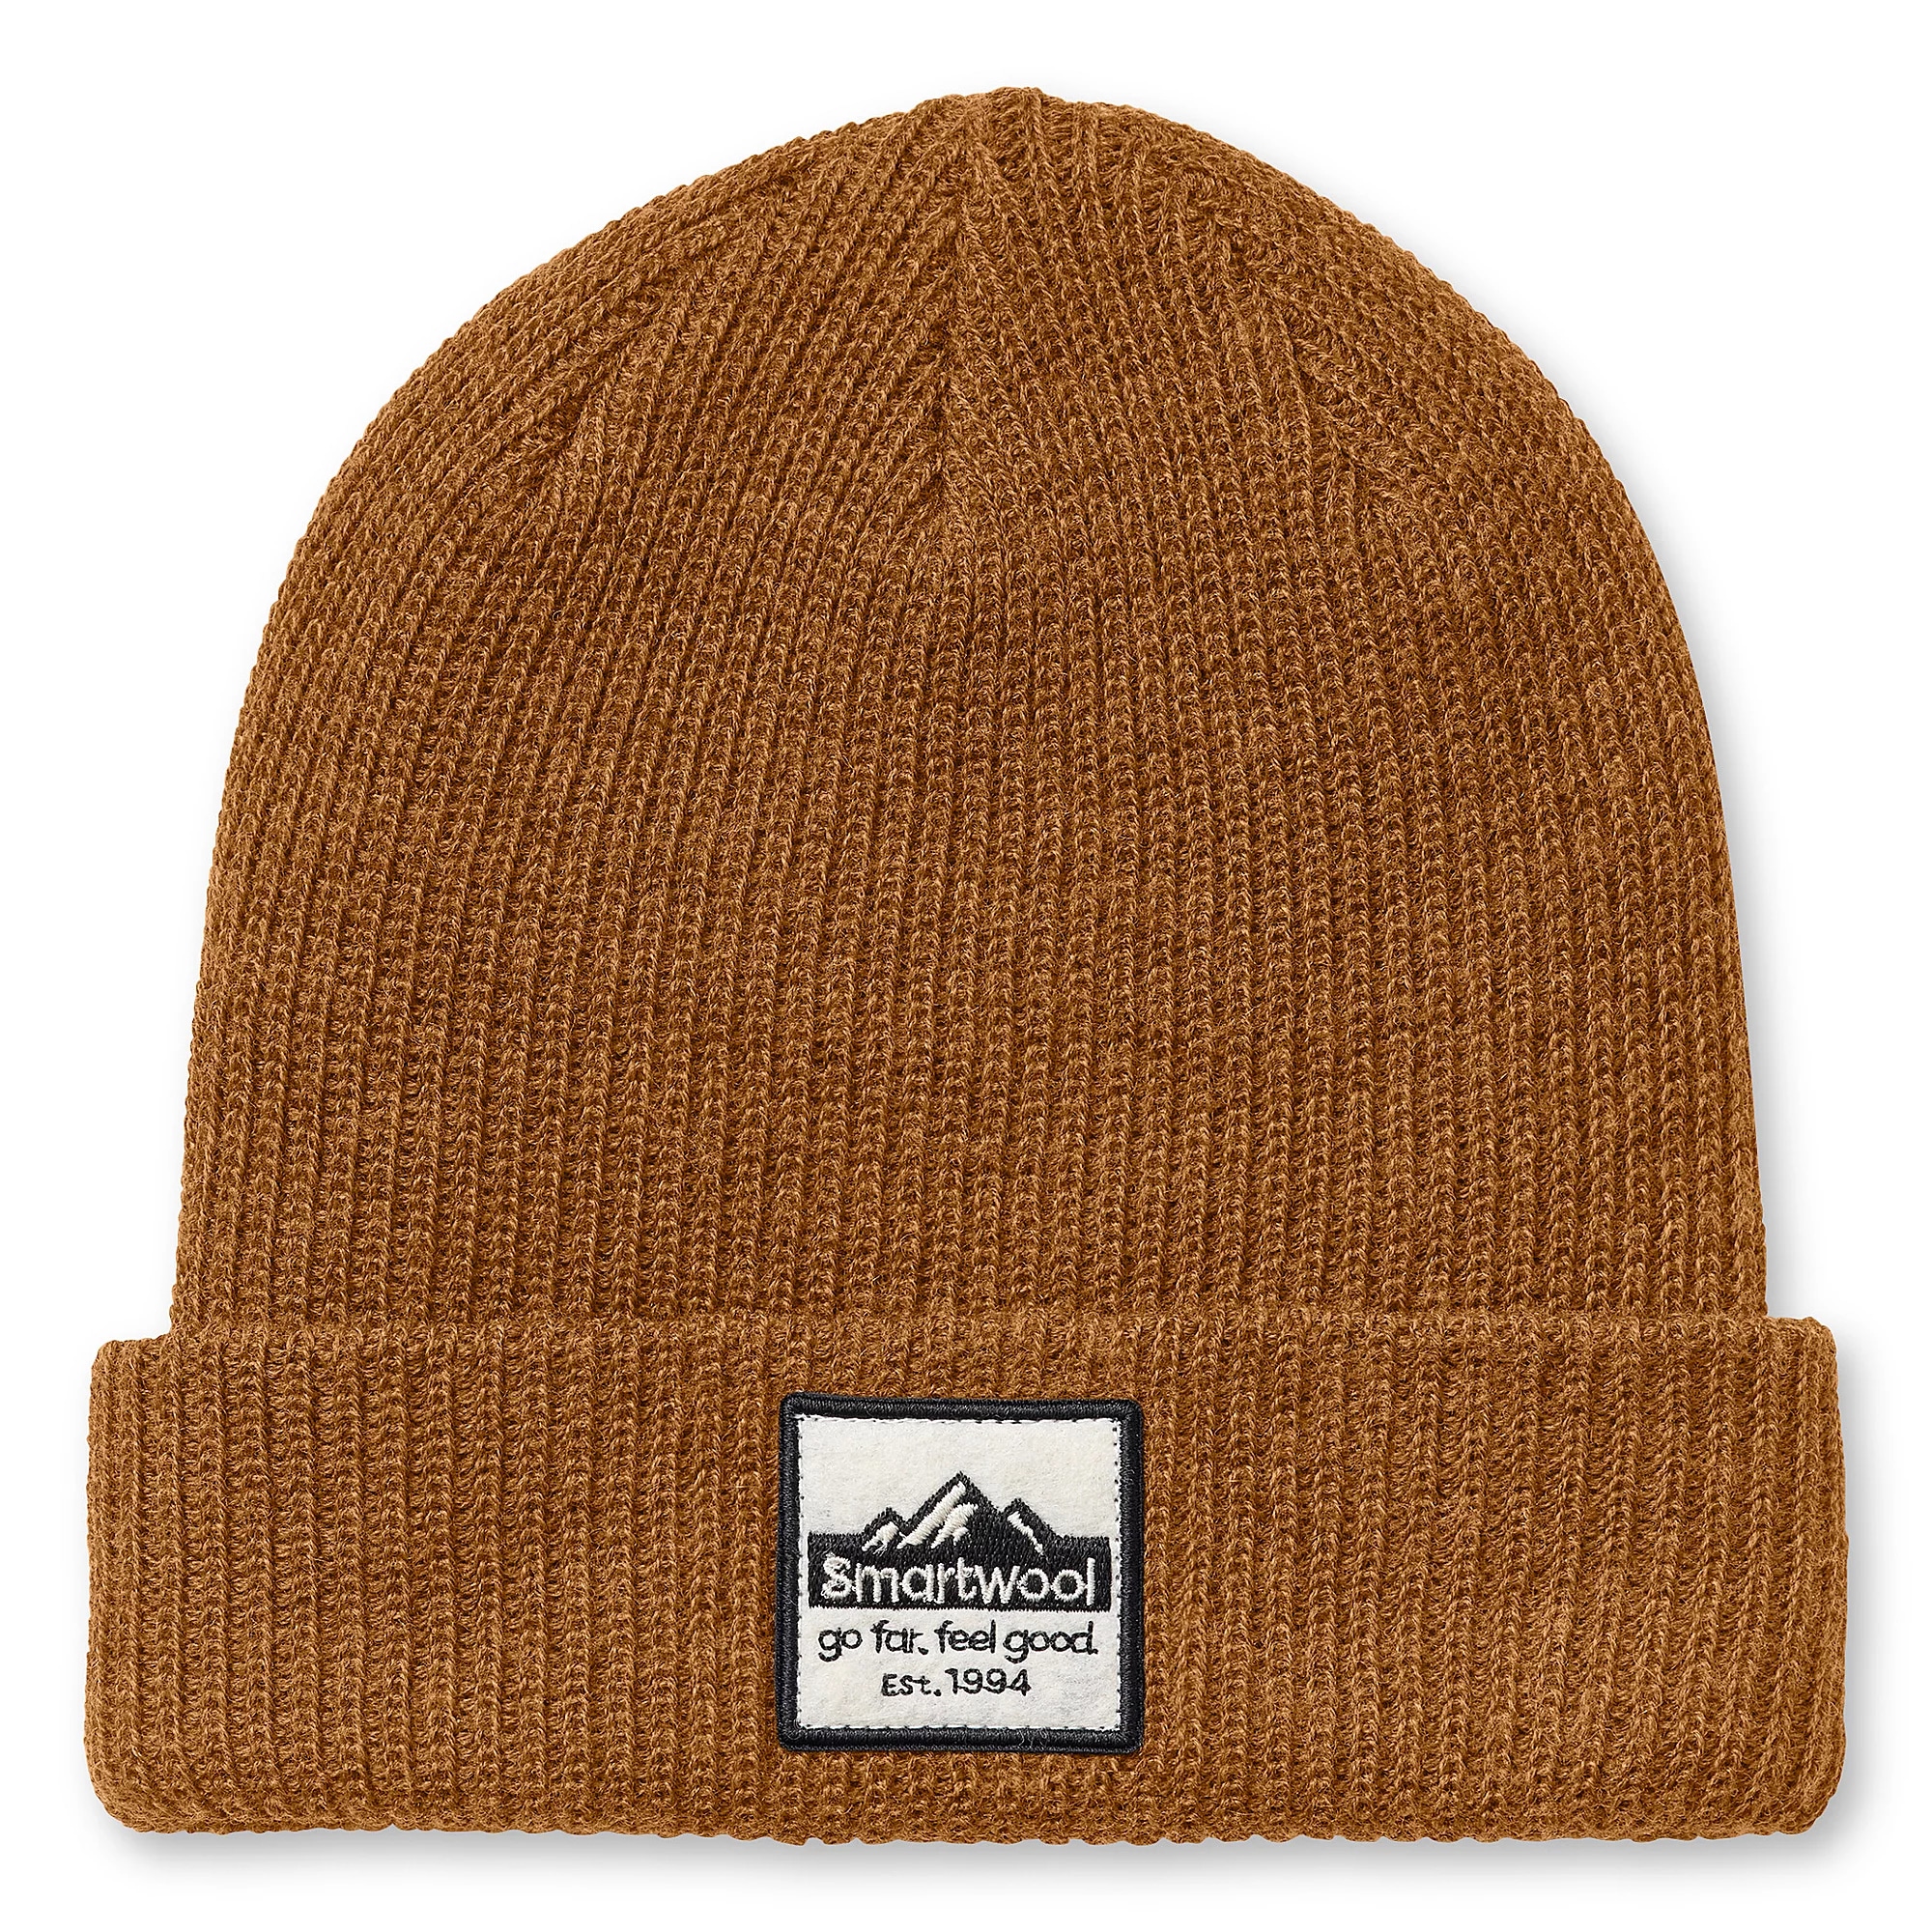 Unisex Smartwool Patch Beanie